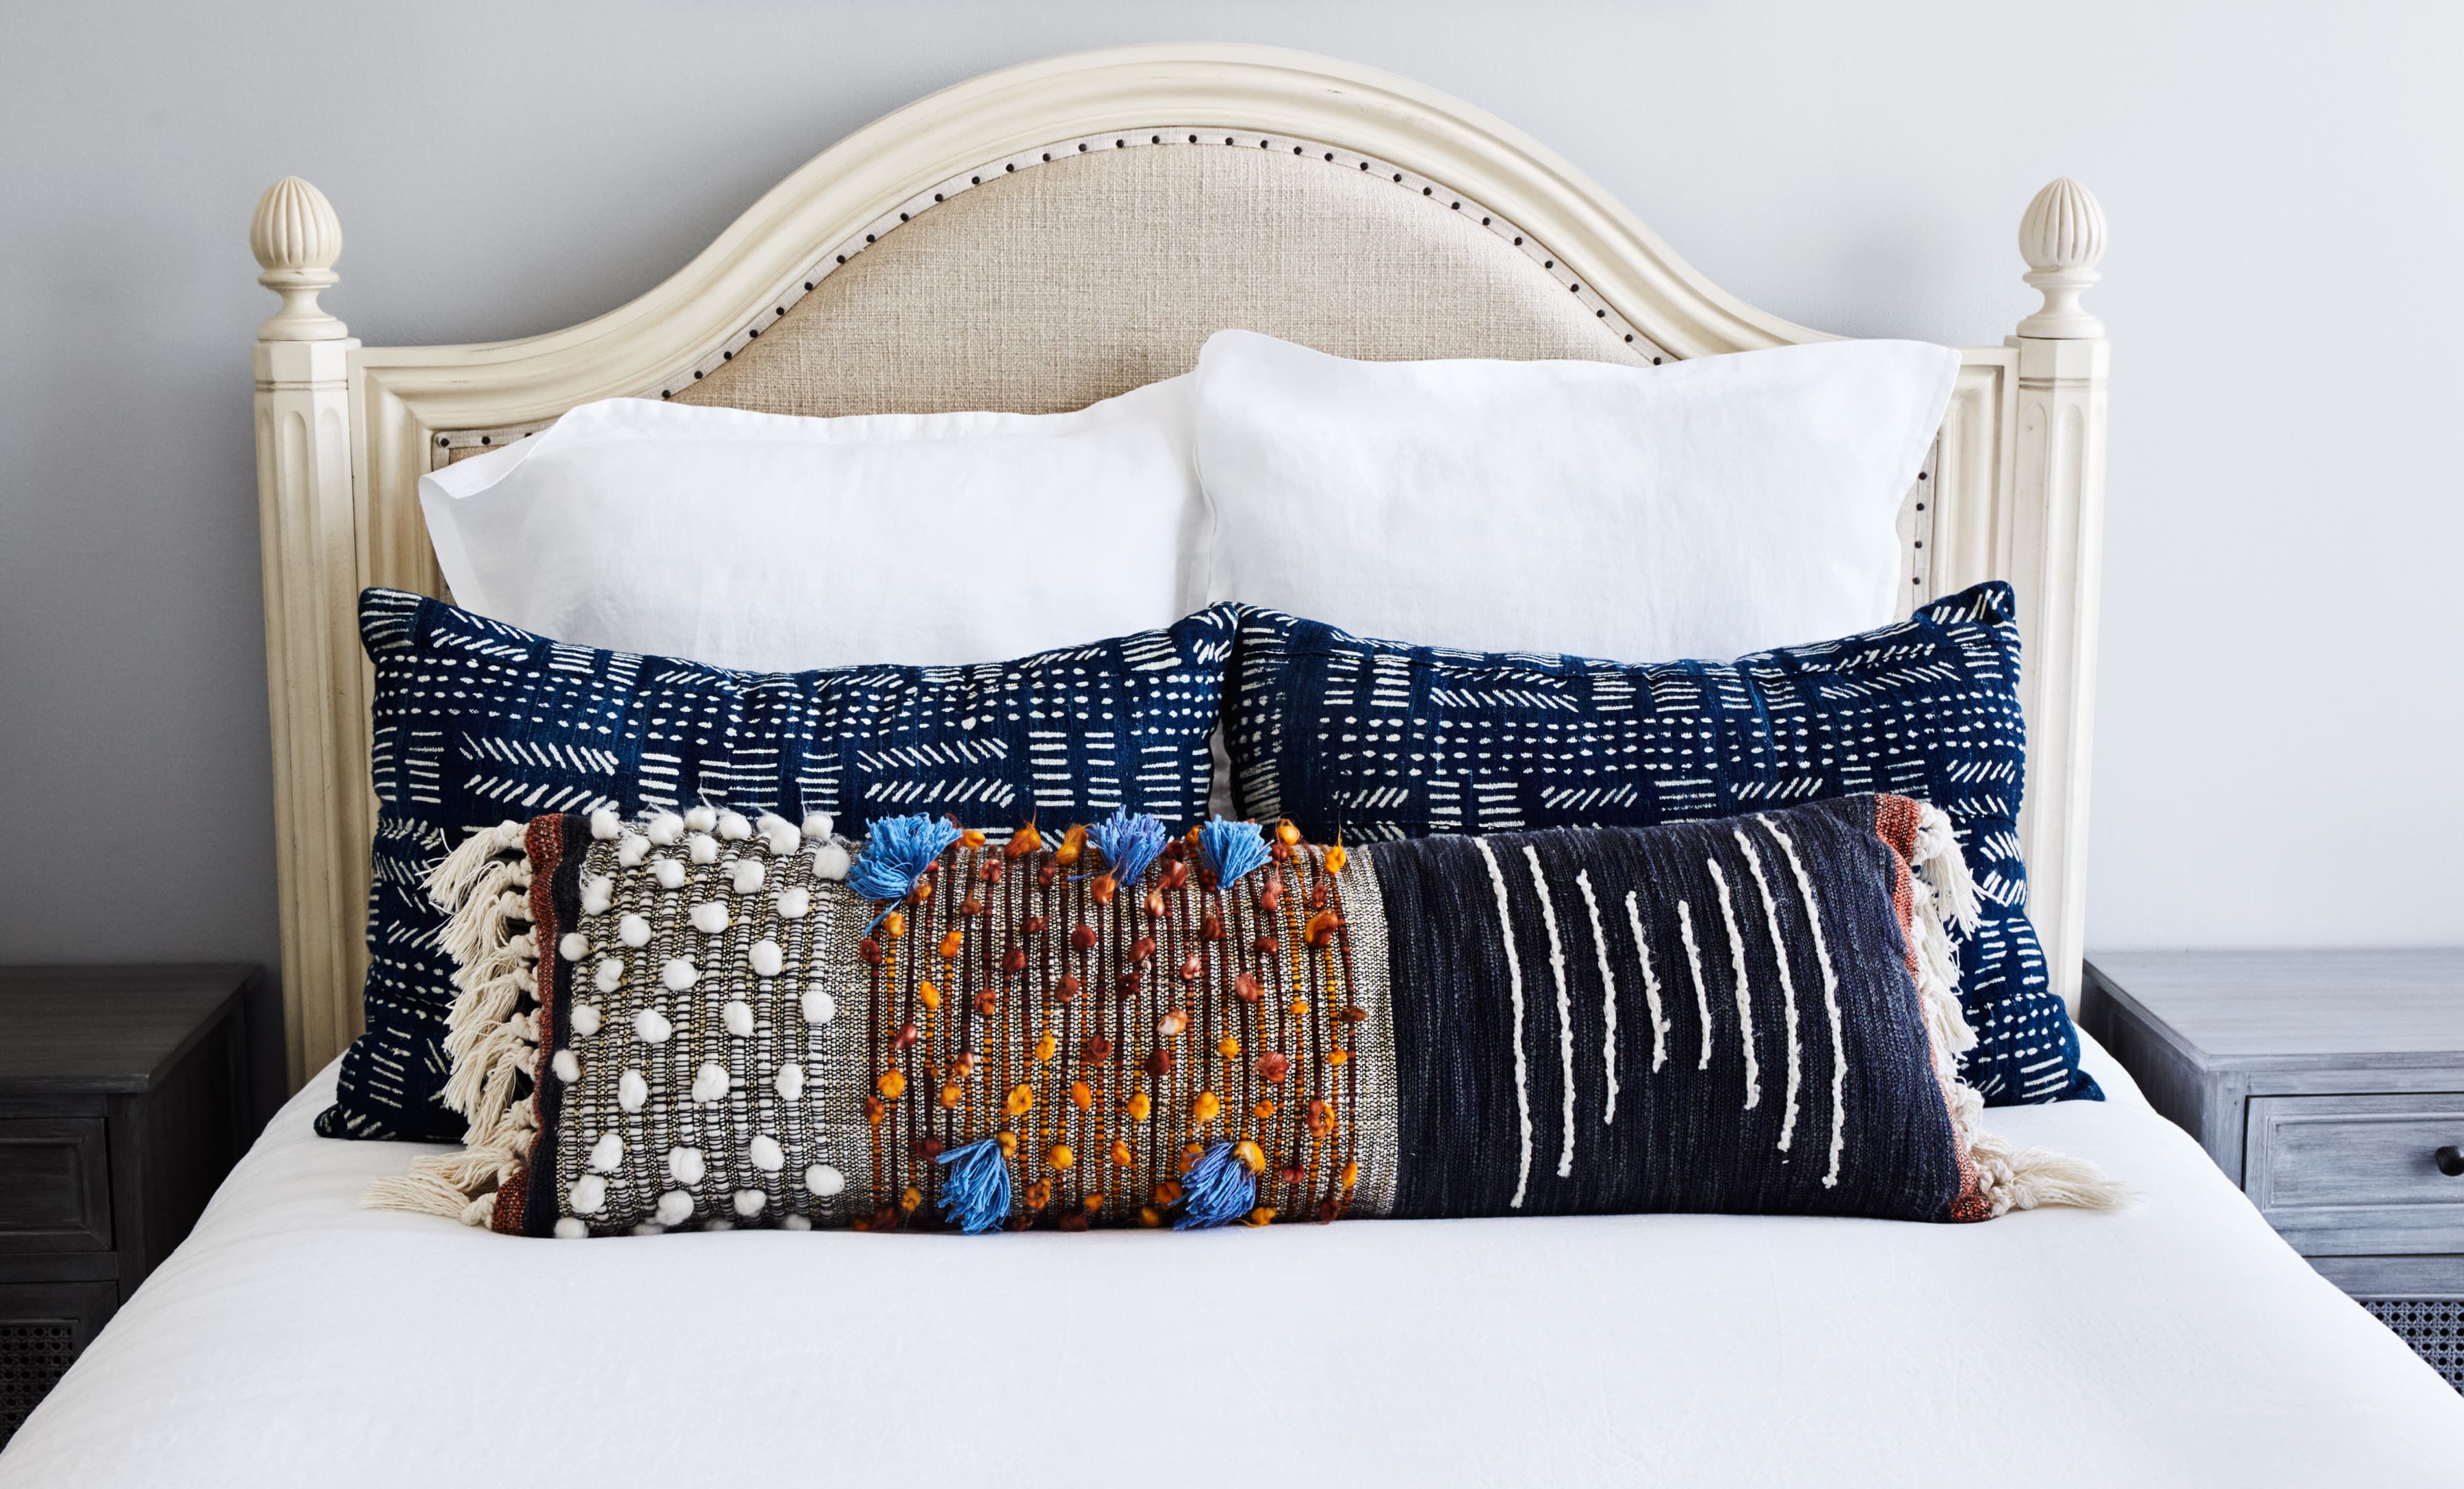 4 DIFFERENT WAYS TO STYLE BED PILLOWS